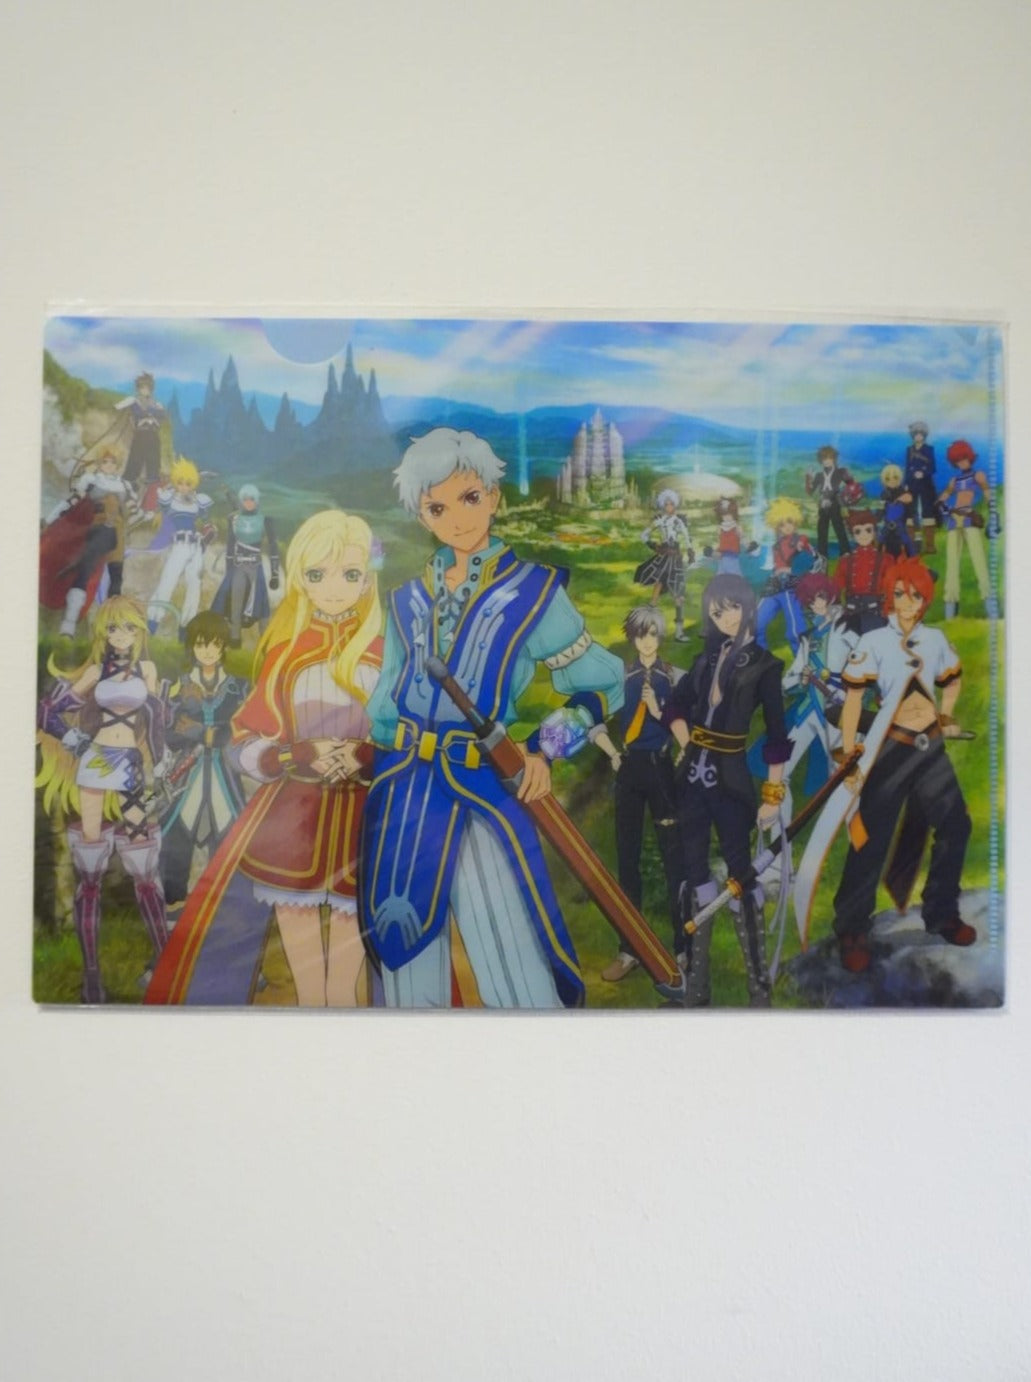 Tales of Clearfile